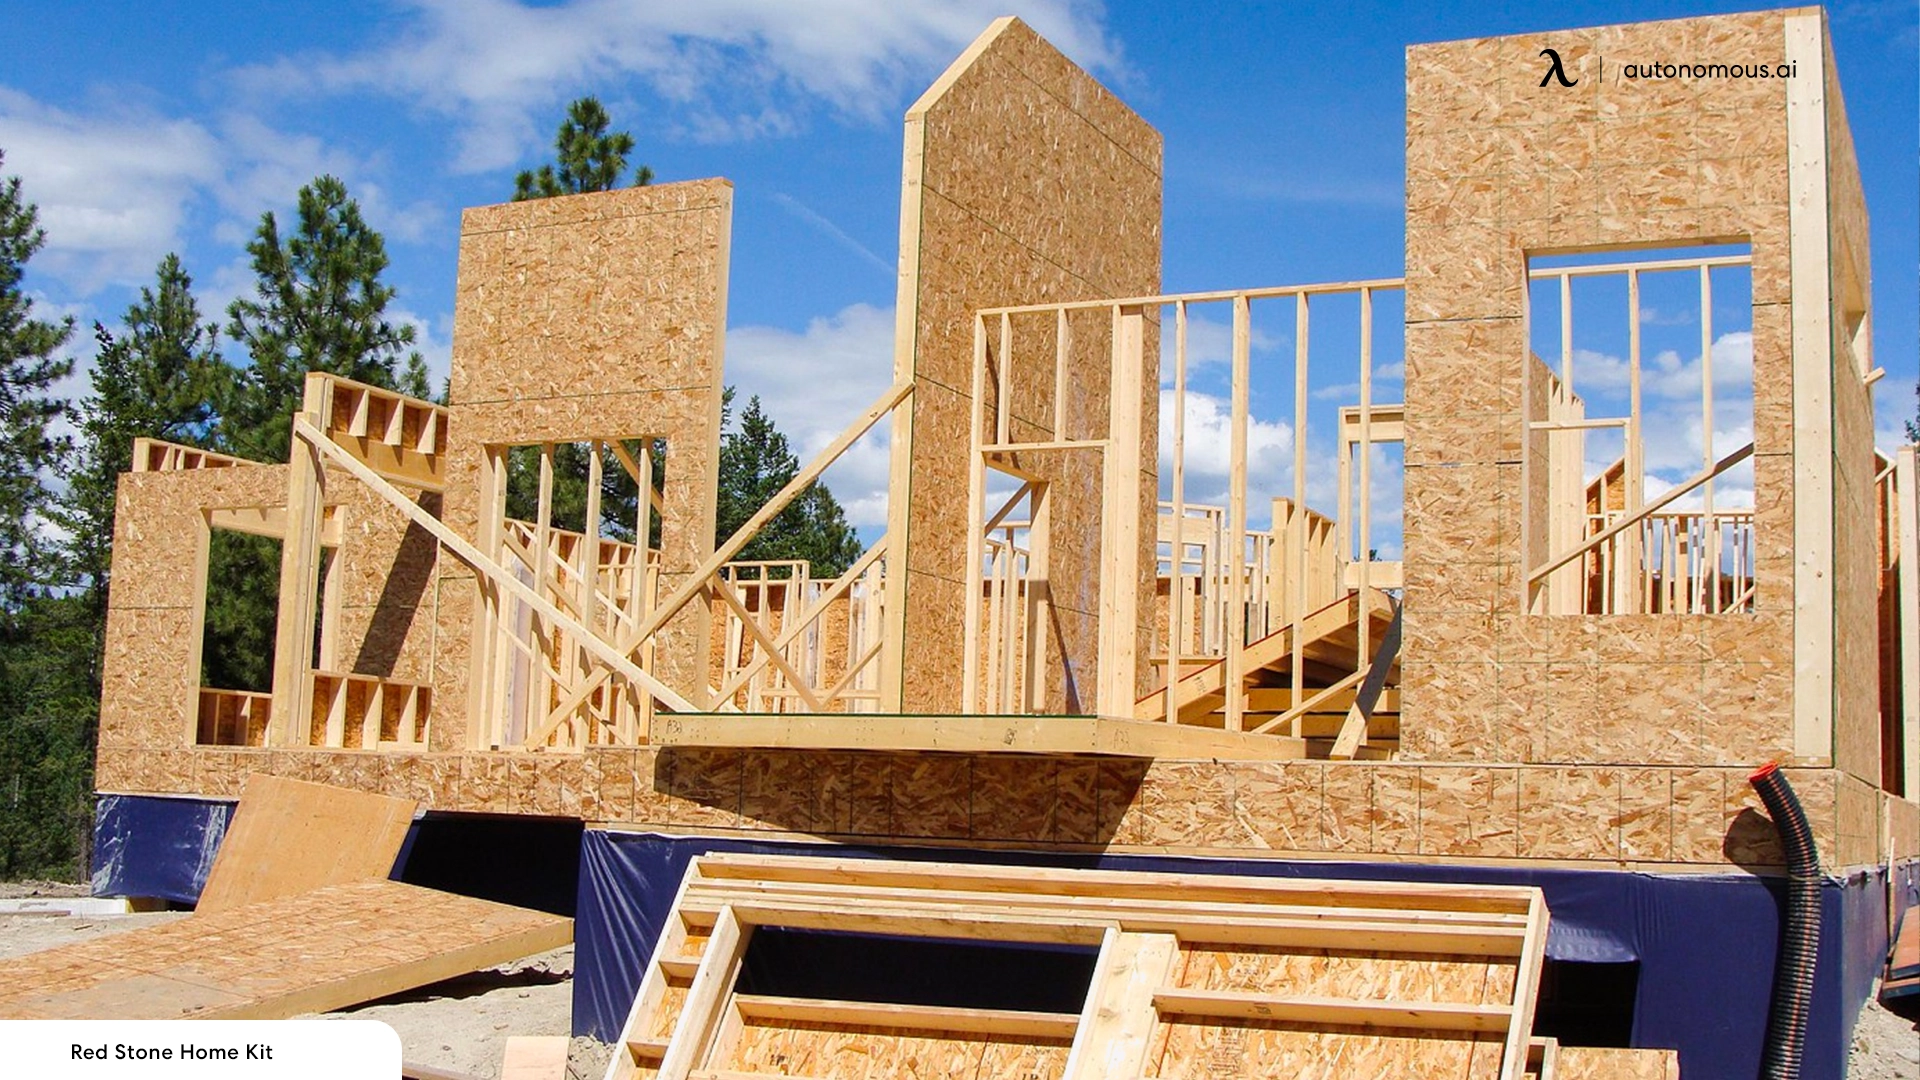 How Long Does It Take to Assemble a Panelized Home On-site?